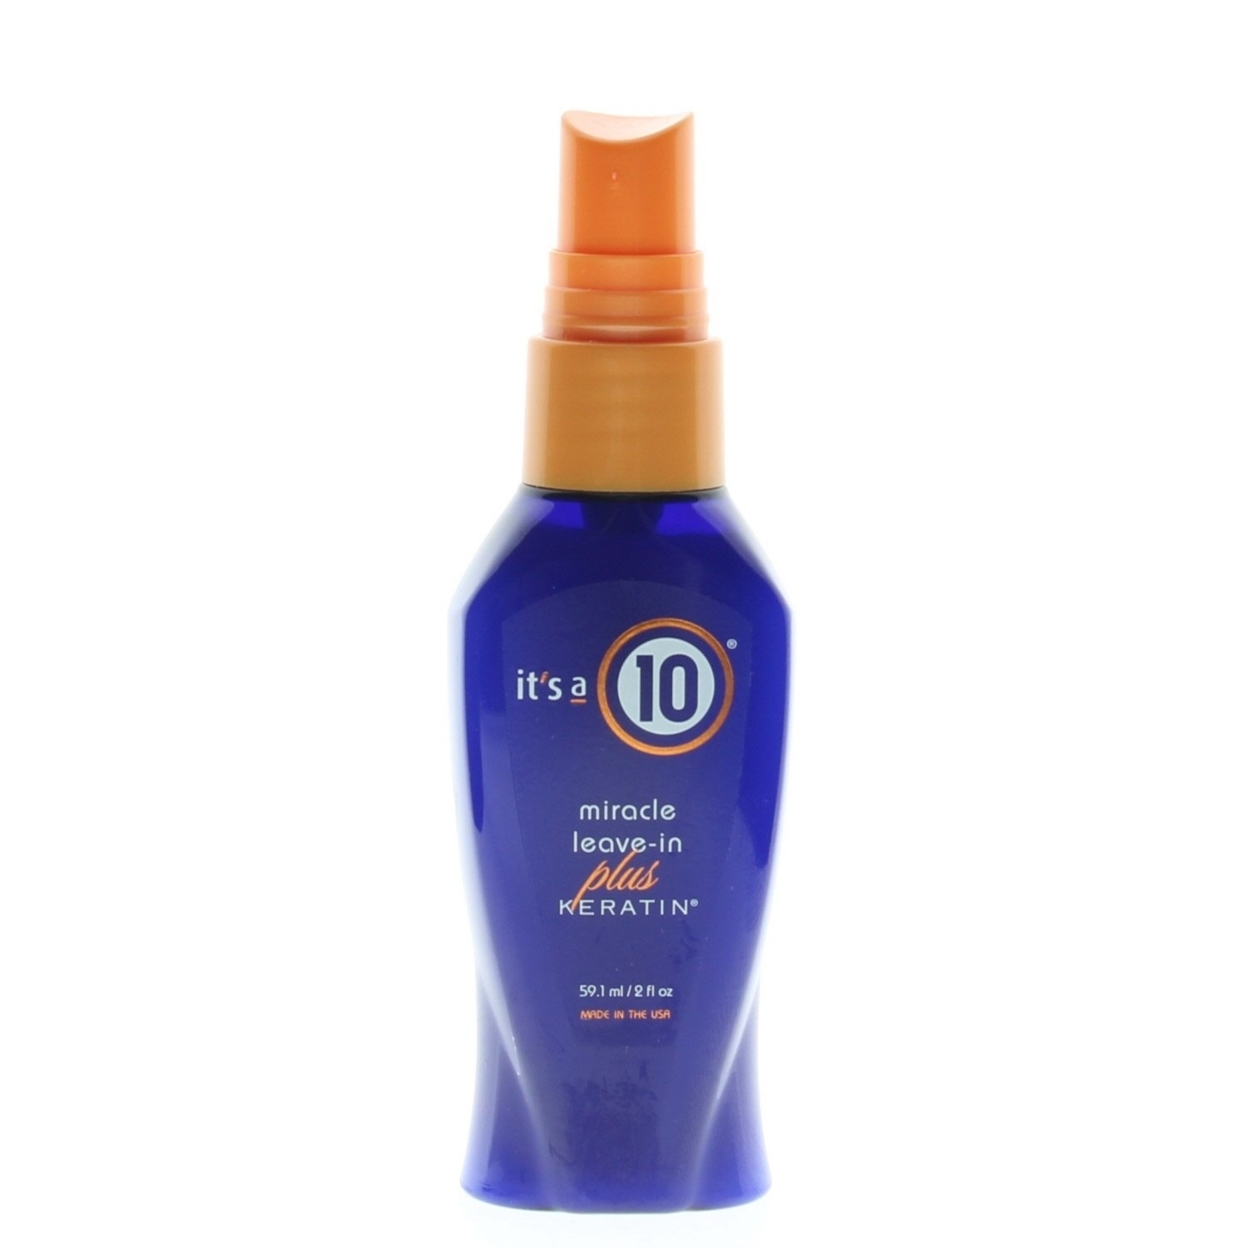 It's A 10 Miracle Leave-In Plus Keratin 2.0oz